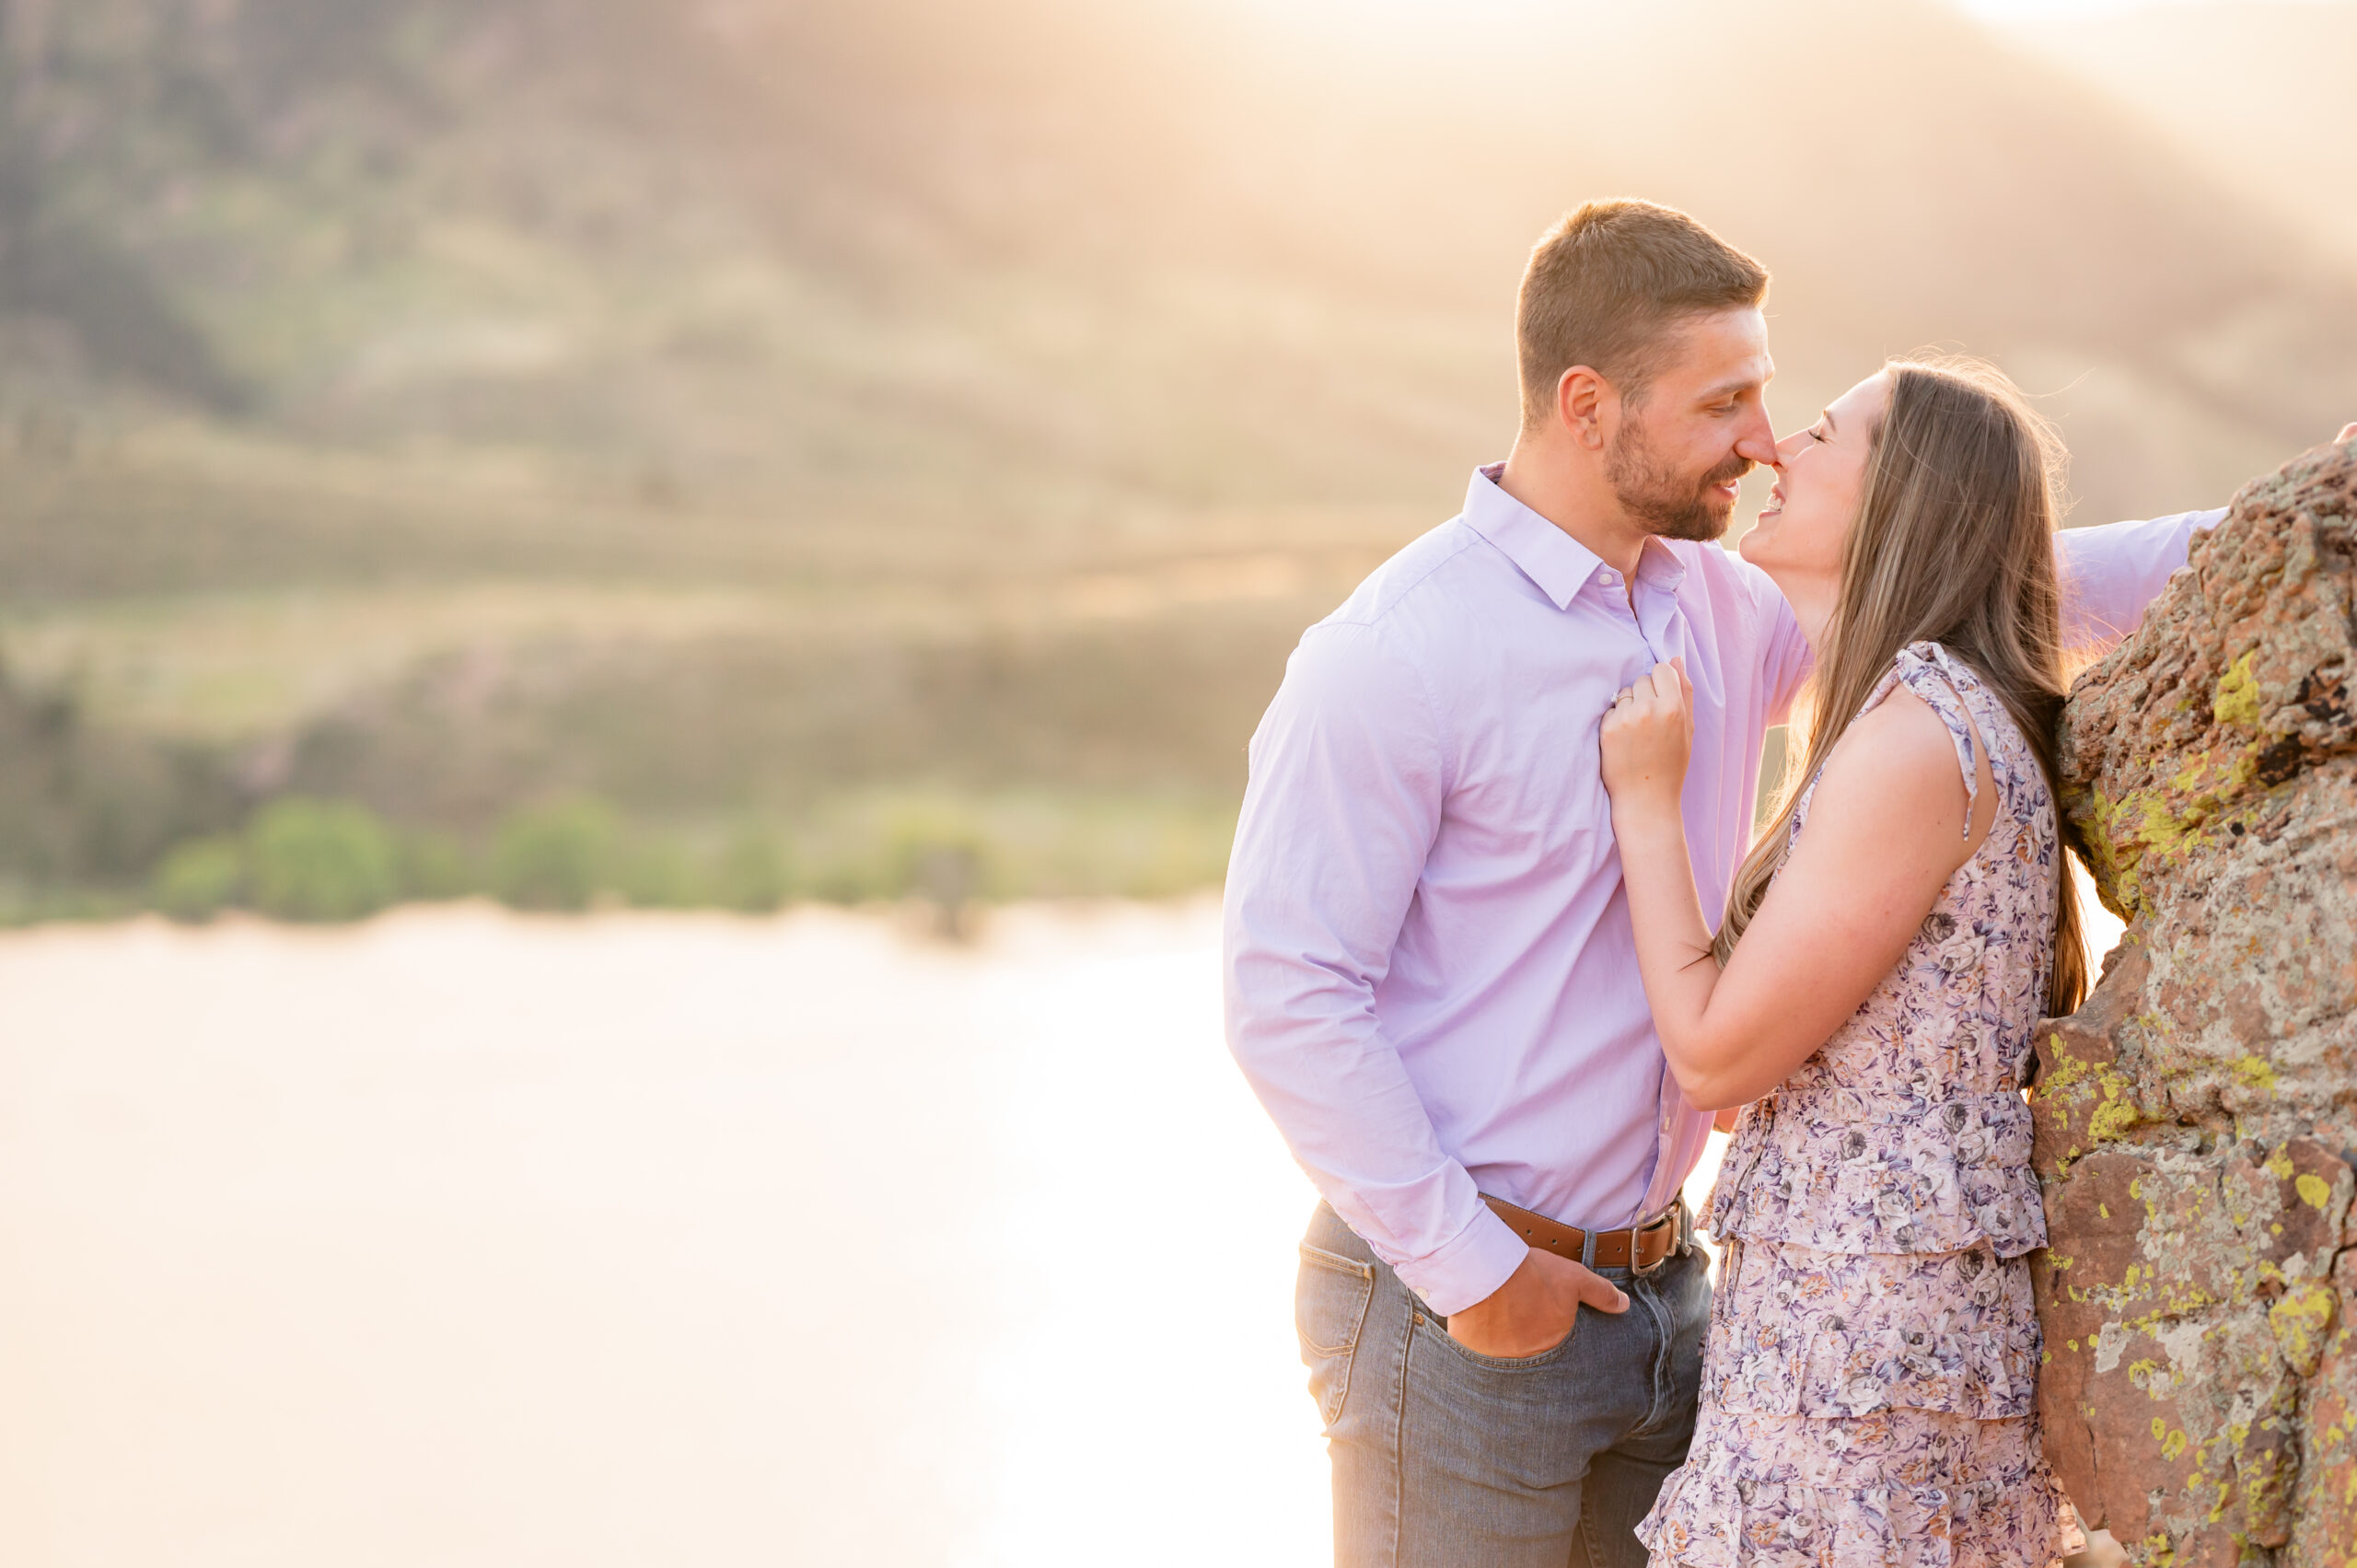 Horsetooth Reservoir Engagement in Fort Collins Colorado | Britni Girard Photography - Colorado Wedding Photographer and Videographer